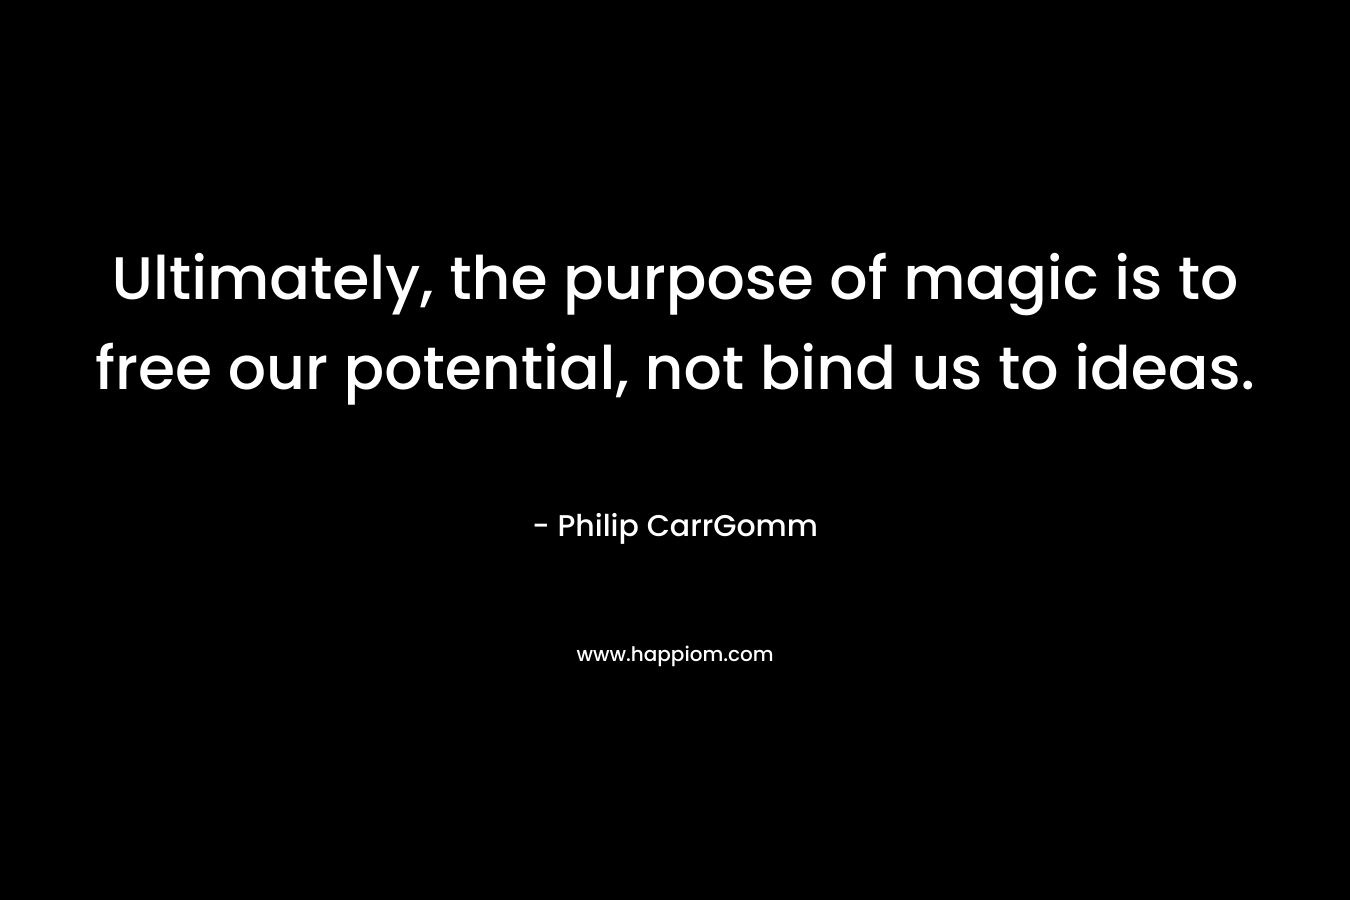 Ultimately, the purpose of magic is to free our potential, not bind us to ideas. – Philip CarrGomm